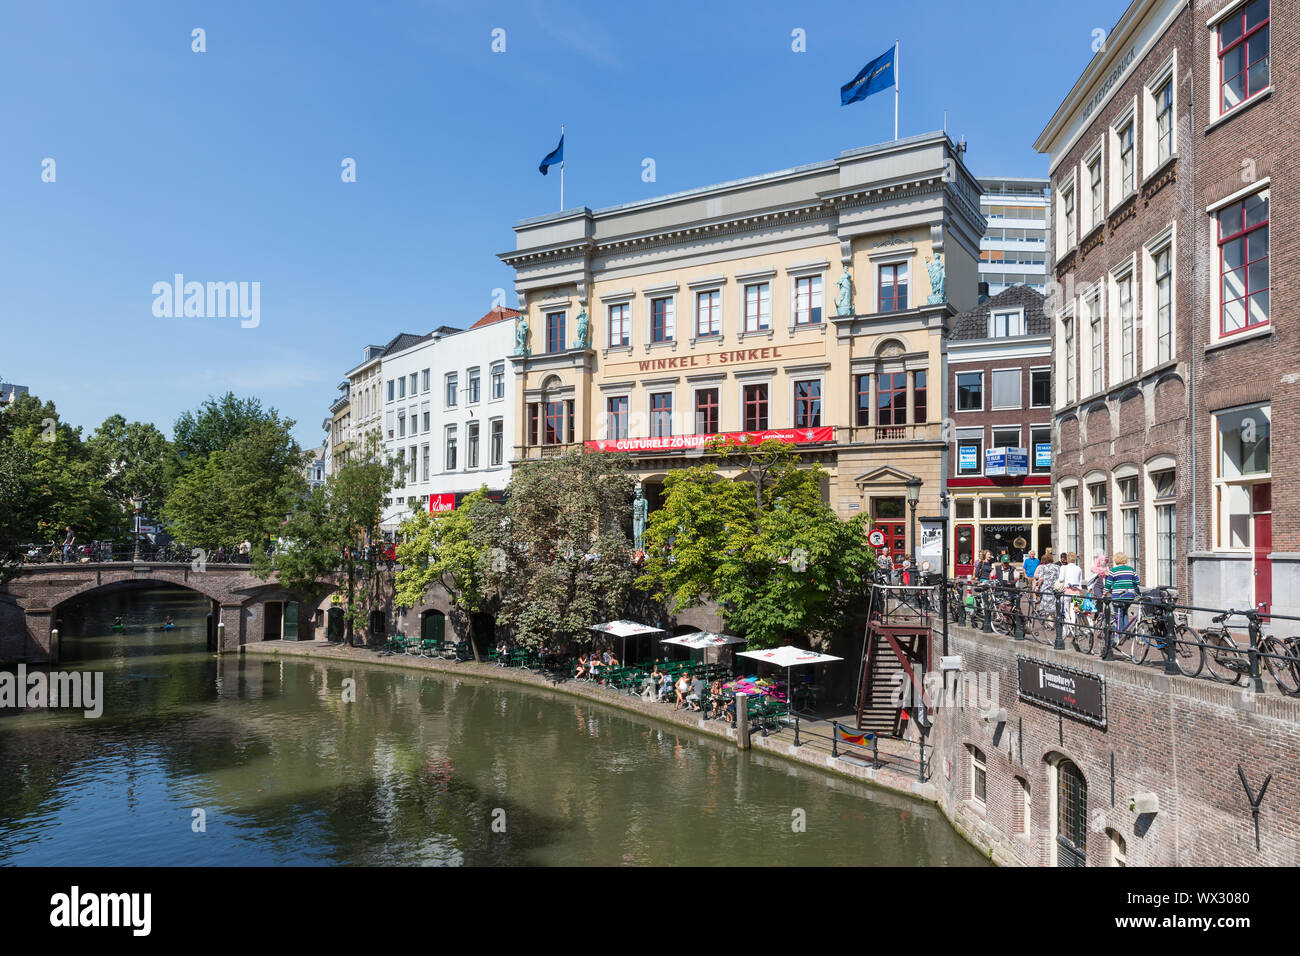 Shopping centre with canal and people in Utrecht, the Netherlands Stock Photo